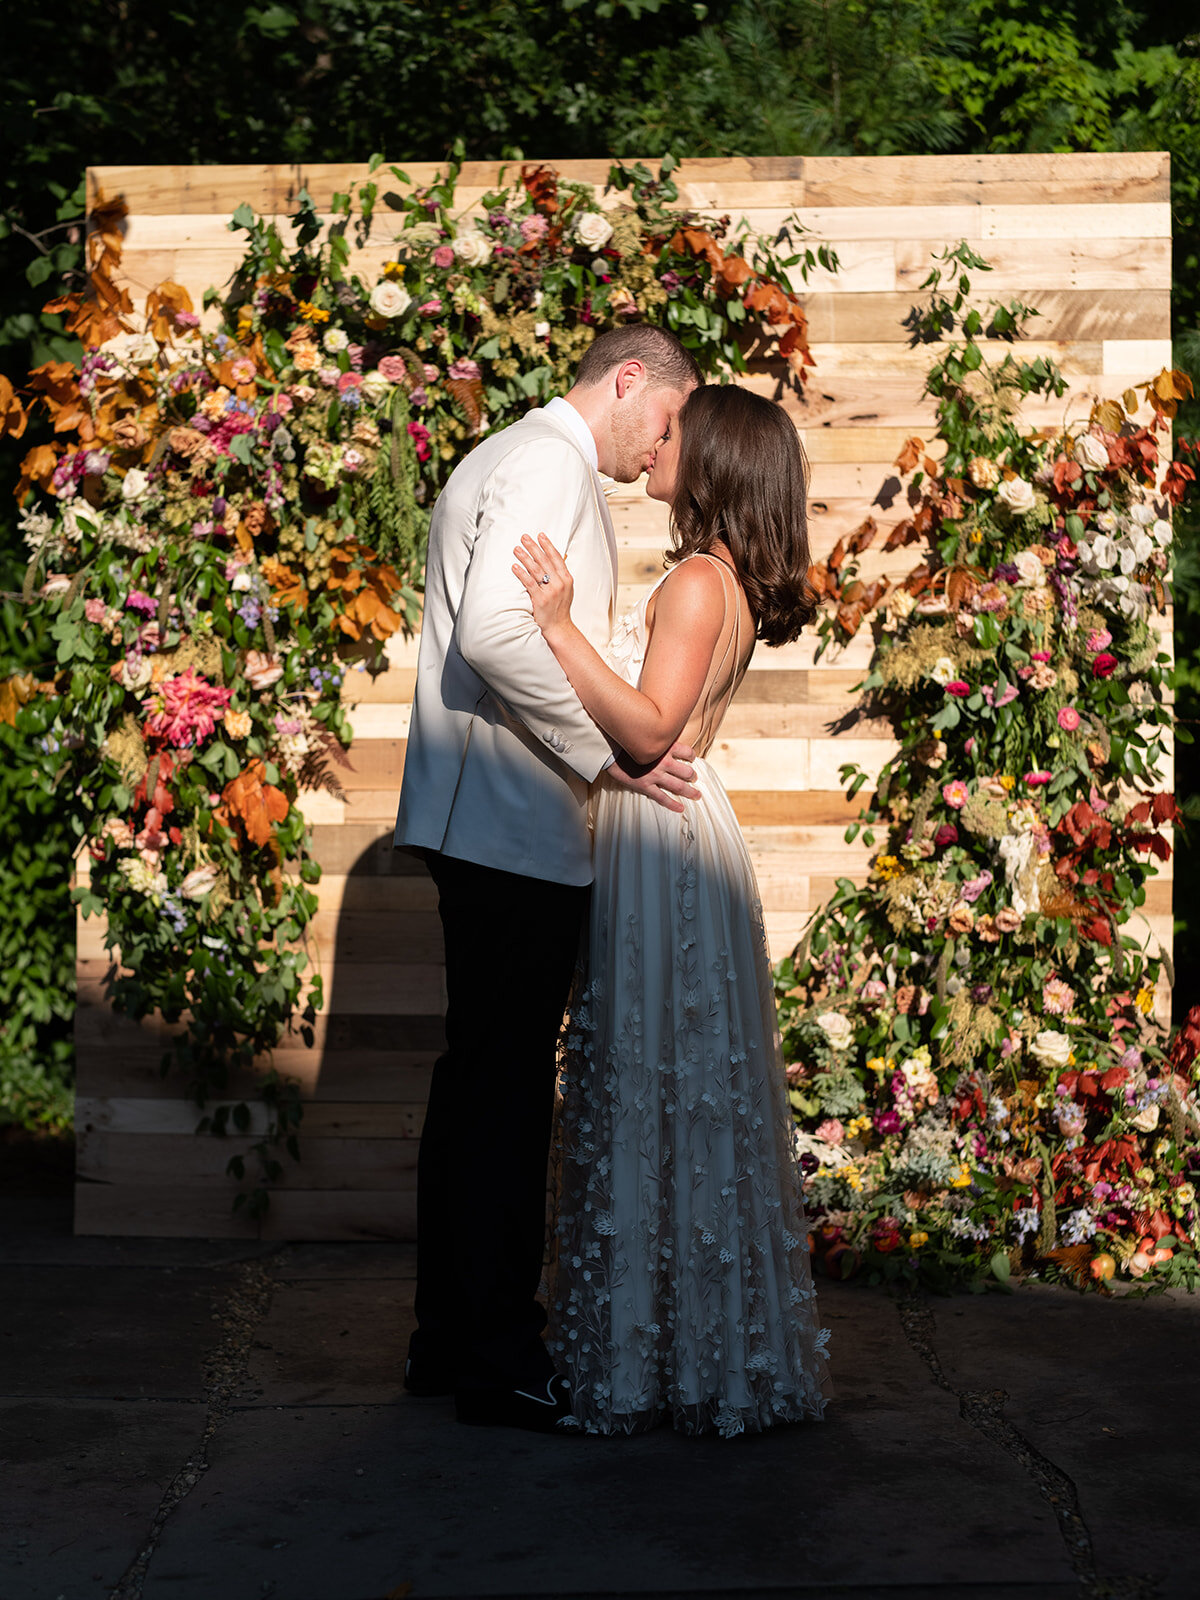 Reclaimed wood wall built by the father of the bride with lush, garden-inspired floral installation, using wildflowers, hops, fruiting branches, copper beech, ranunculus, garden roses, and tulips. RT Lodge wedding ceremony flowers.